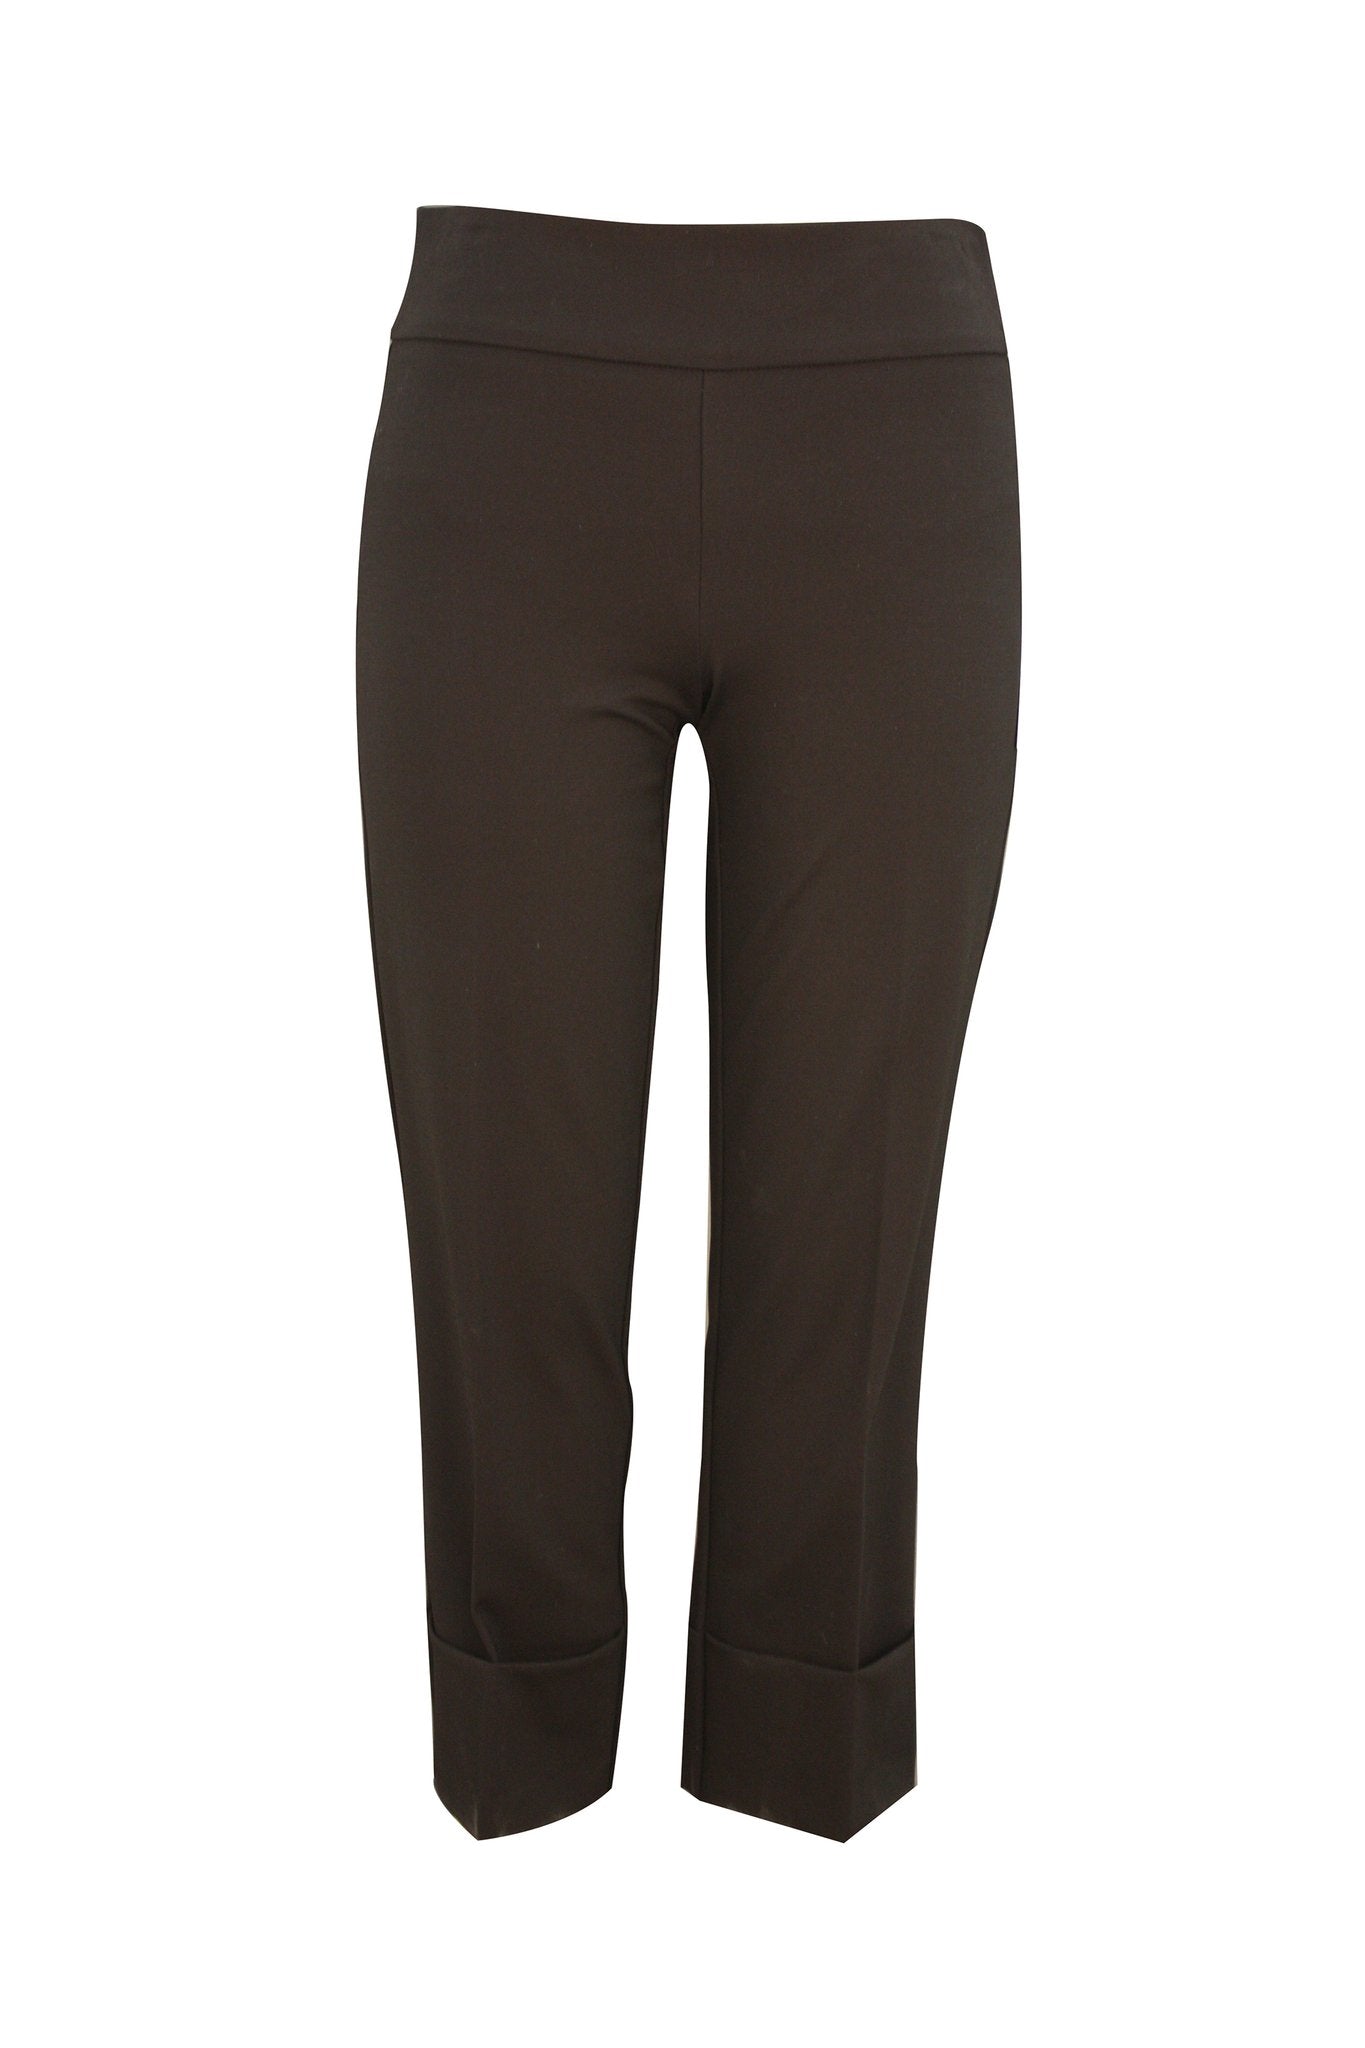 Women's Up! | Crop Pull On Pants with Wide Cuffs | Black - F.L. CROOKS.COM